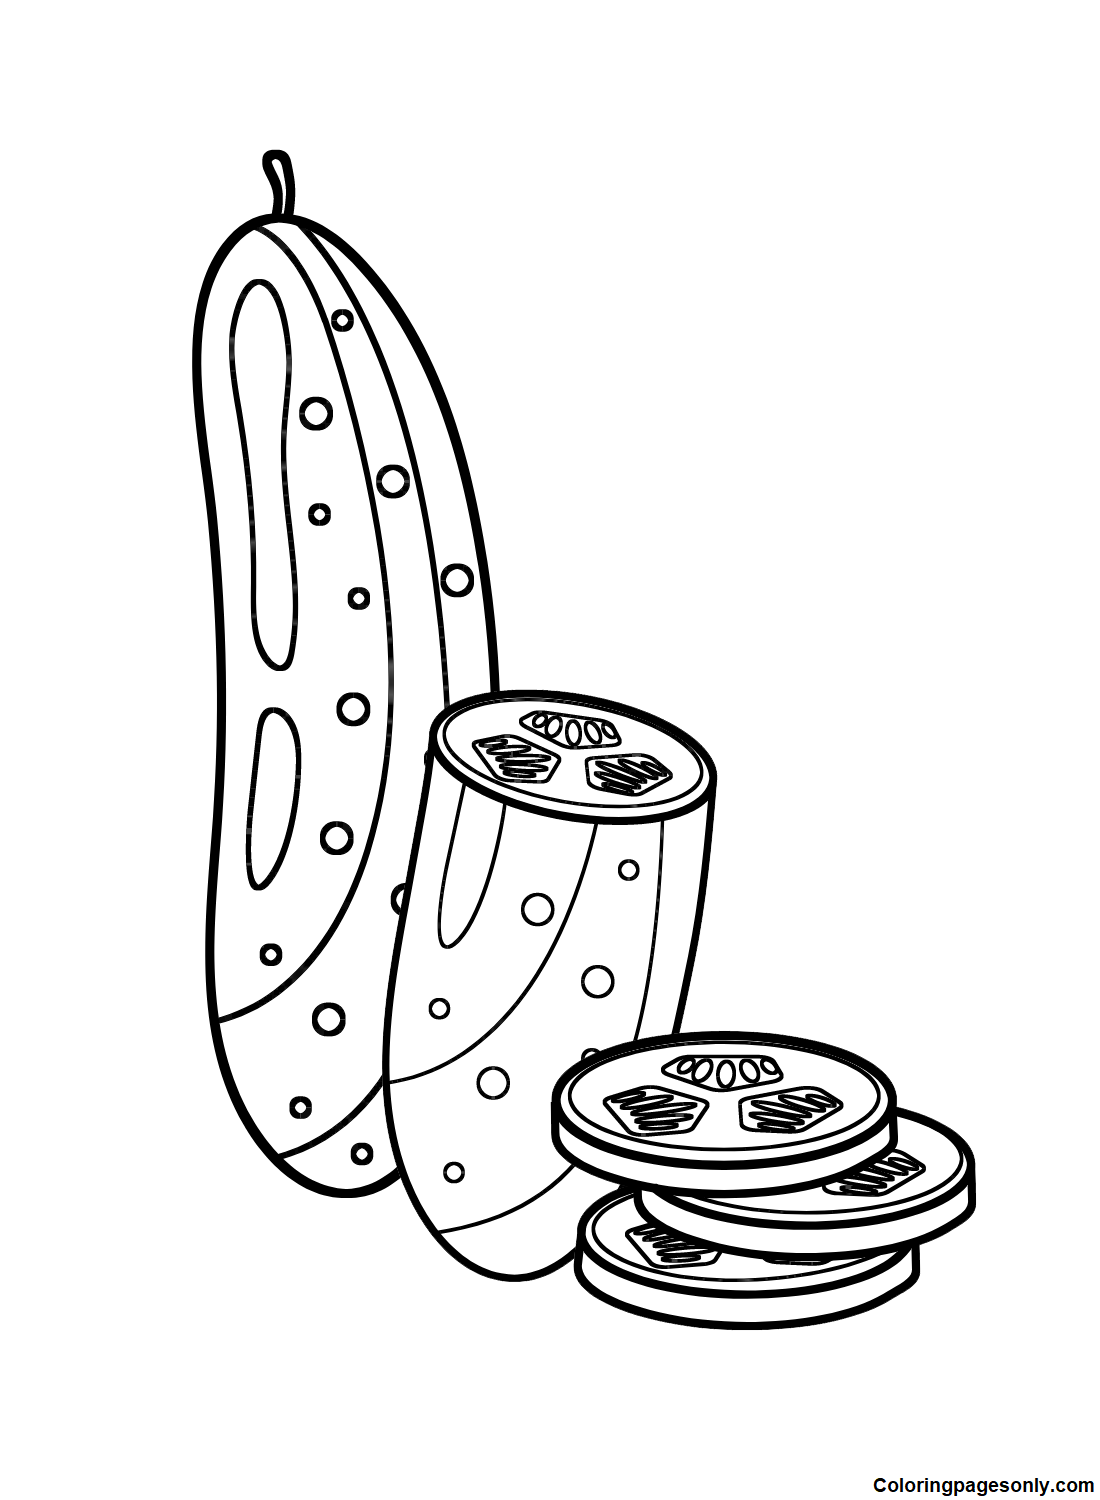 Cucumber Free Coloring Page